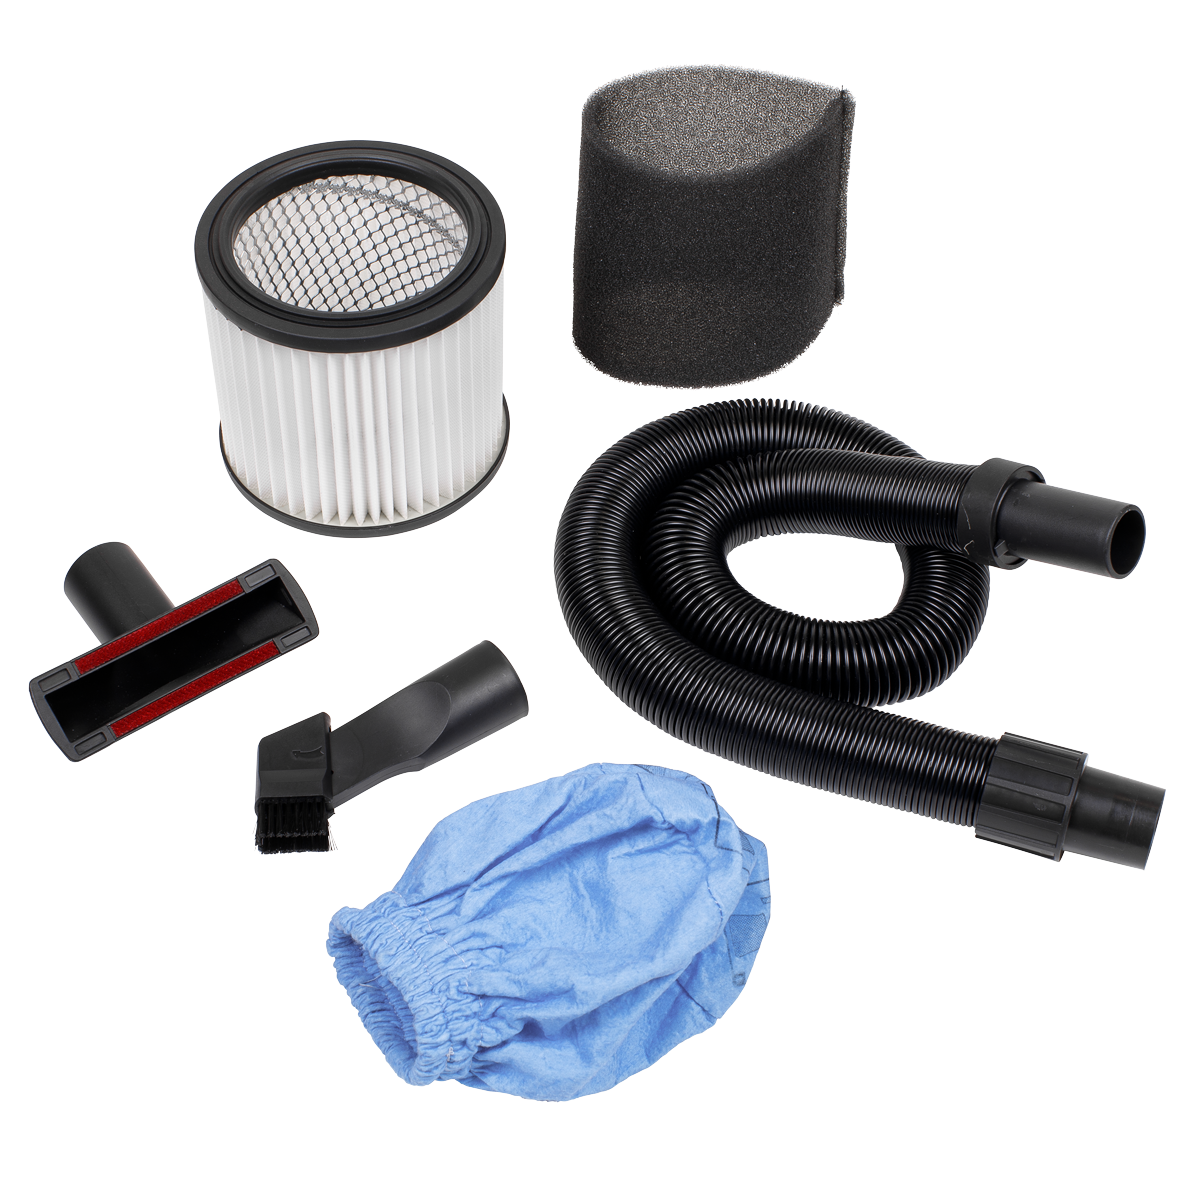 Sealey vacuum with all vacuum cleaner accessories